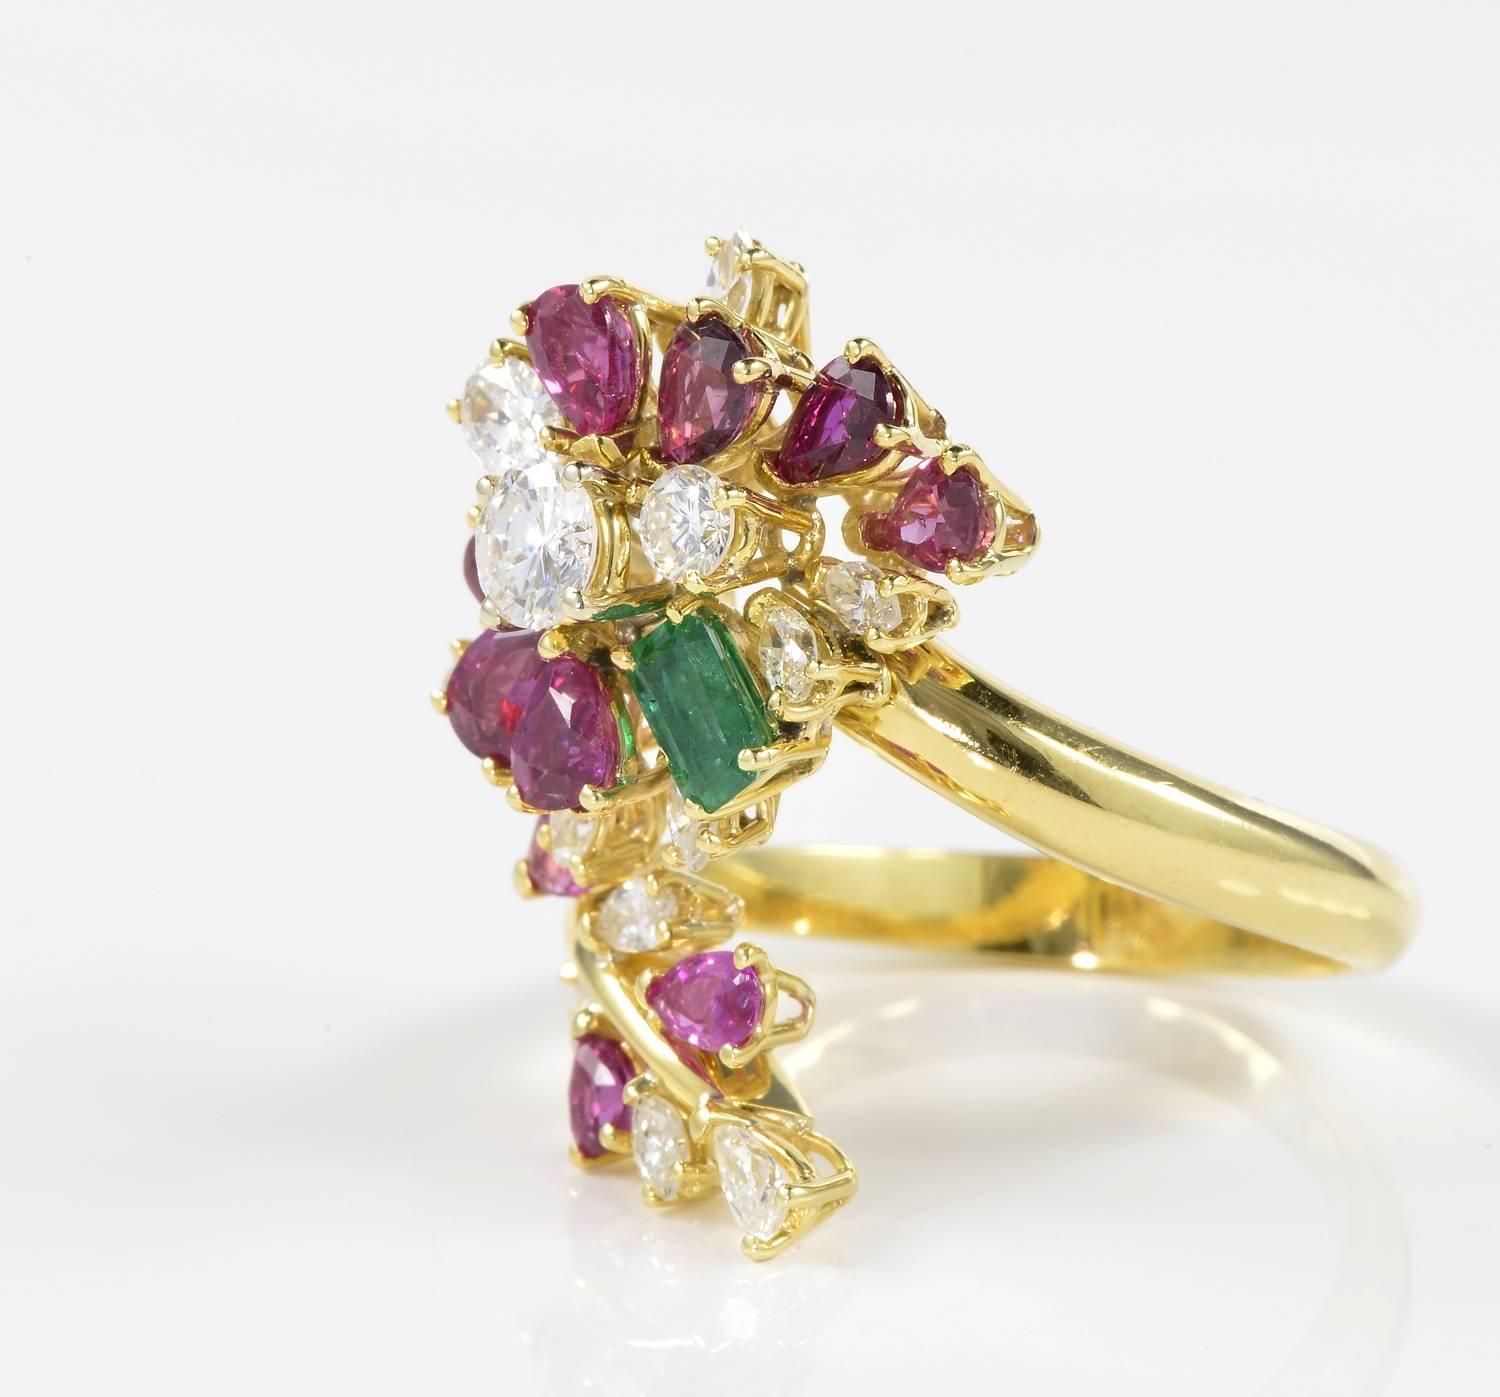 Exquisitely hand crafted as a statement cocktail ring. 
Set throughout with vivid Burmese Rubies of 2.50 Ct enriching with colourful impact the charming floral design coiling around the finger. 1.23 Ct Diamonds F/G VS/SI and some champagne colour